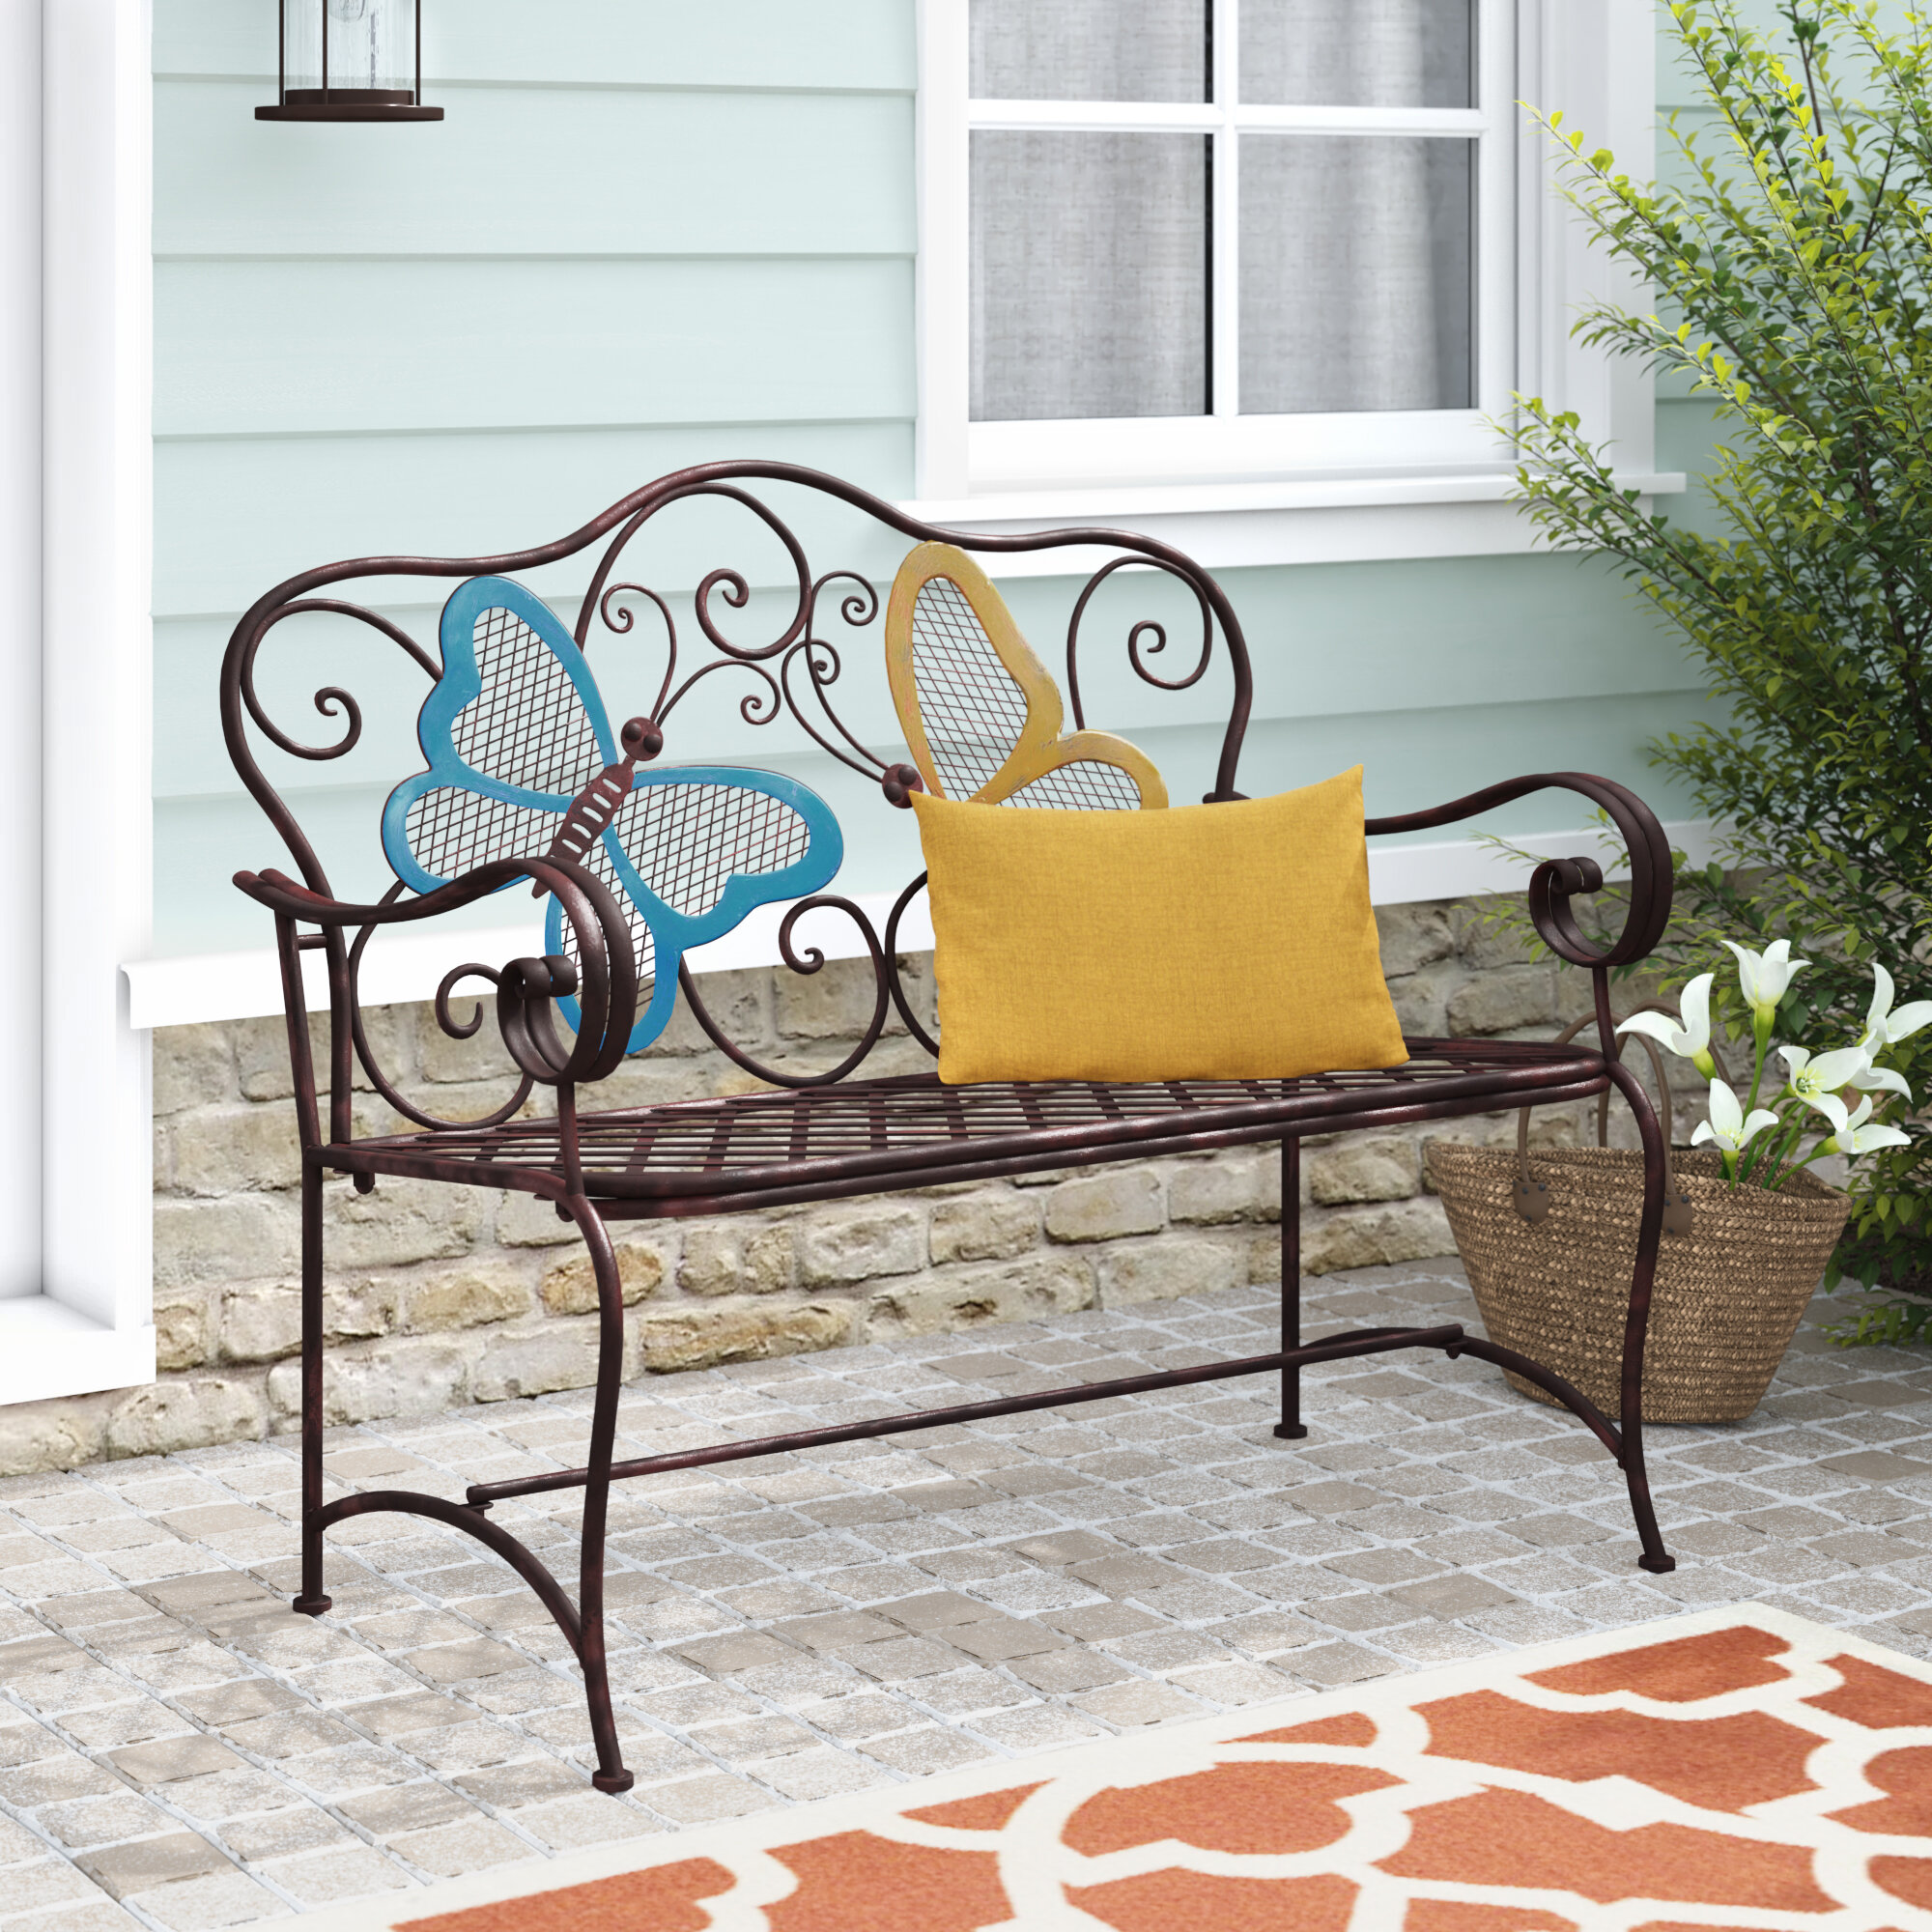 White Lawn. Porch Balcony Outdoor Bench Park Garden Bench ，All Chair Anti Rust Cast Aluminum Patio Yard Bench ，Carved Rose Loveseat Bench for Backyard